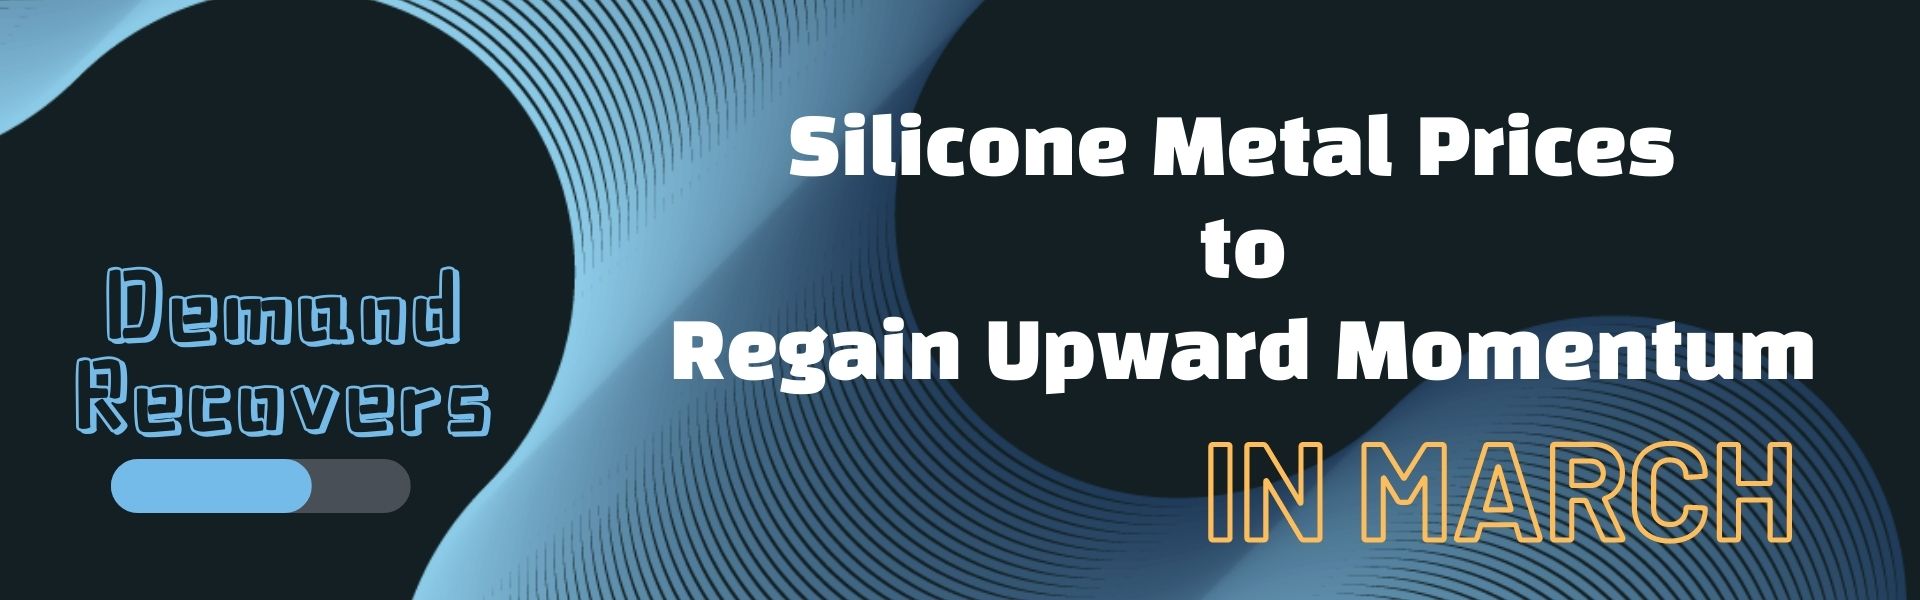 Demand Recovers: Silicone Metal Prices to Regain Upward Momentum in March